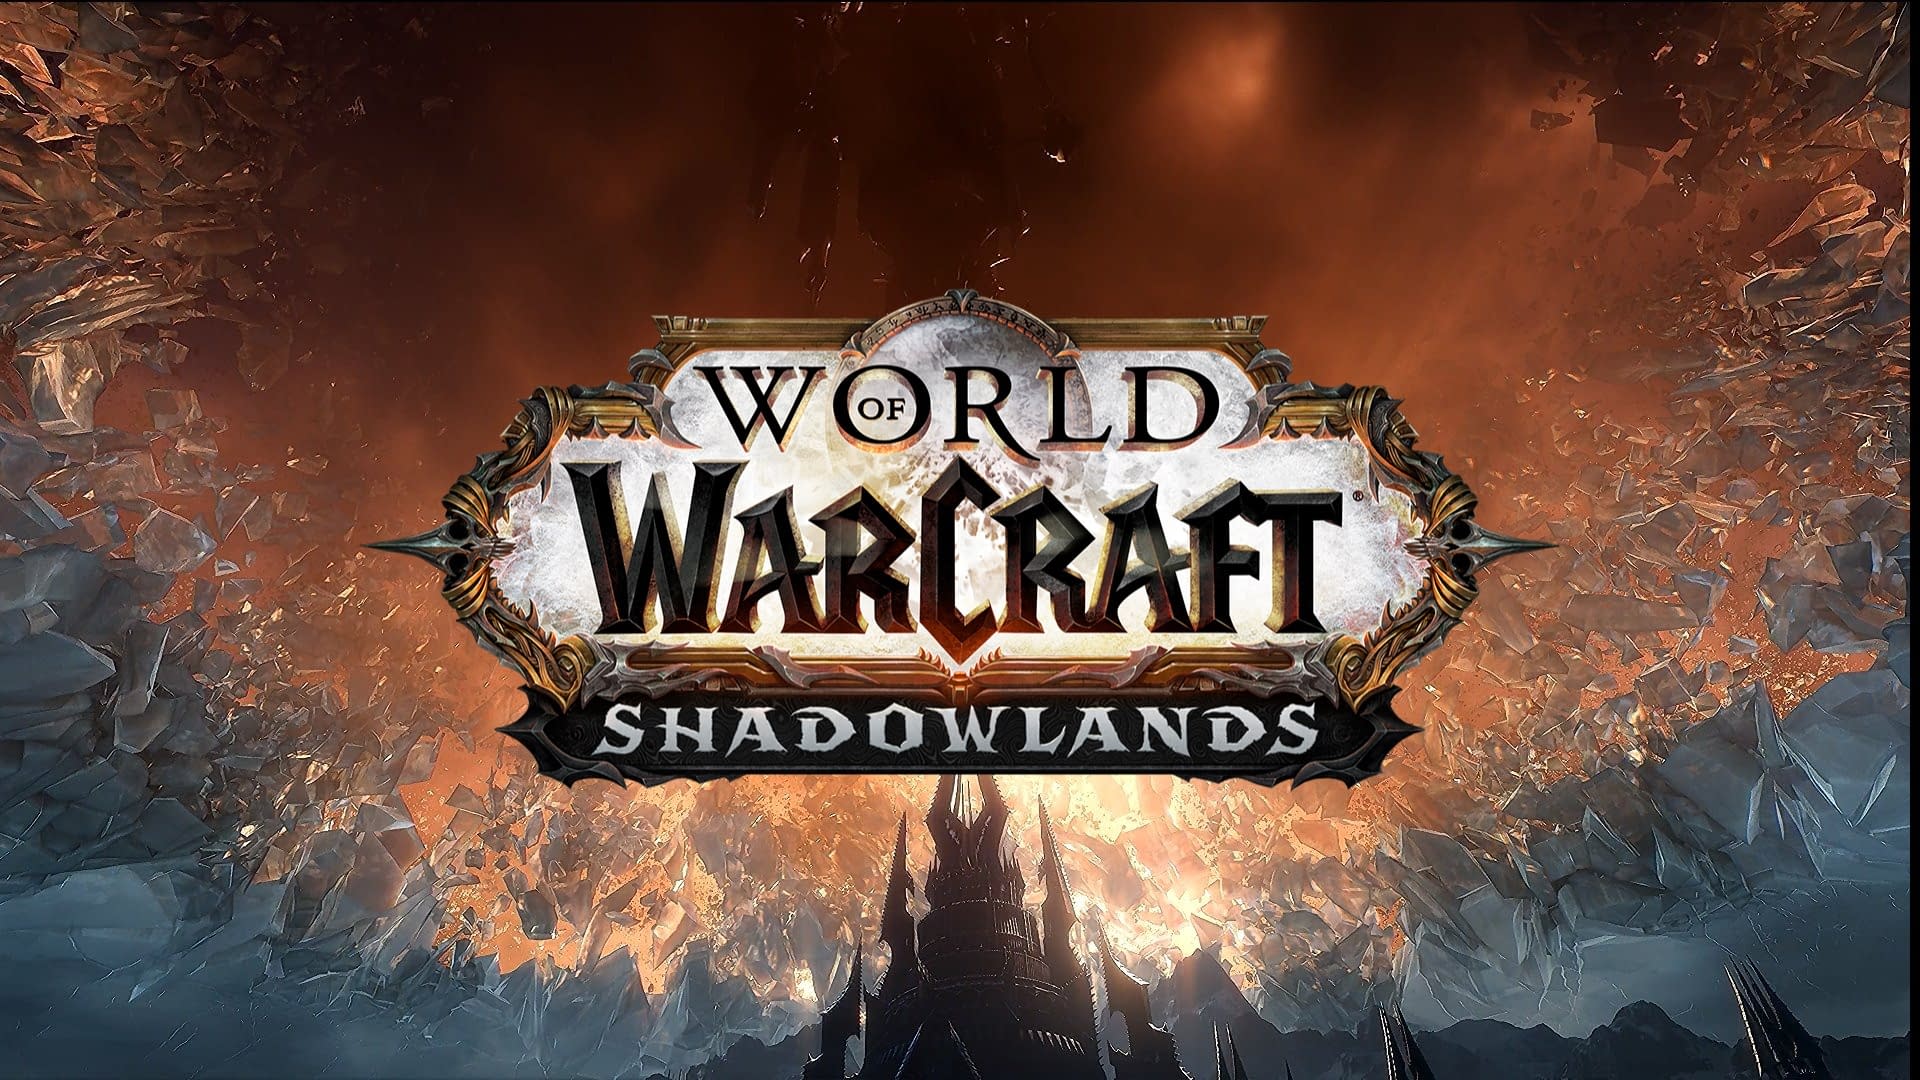 World Of Warcraft Shadowlands Will Give An Update On June 9th